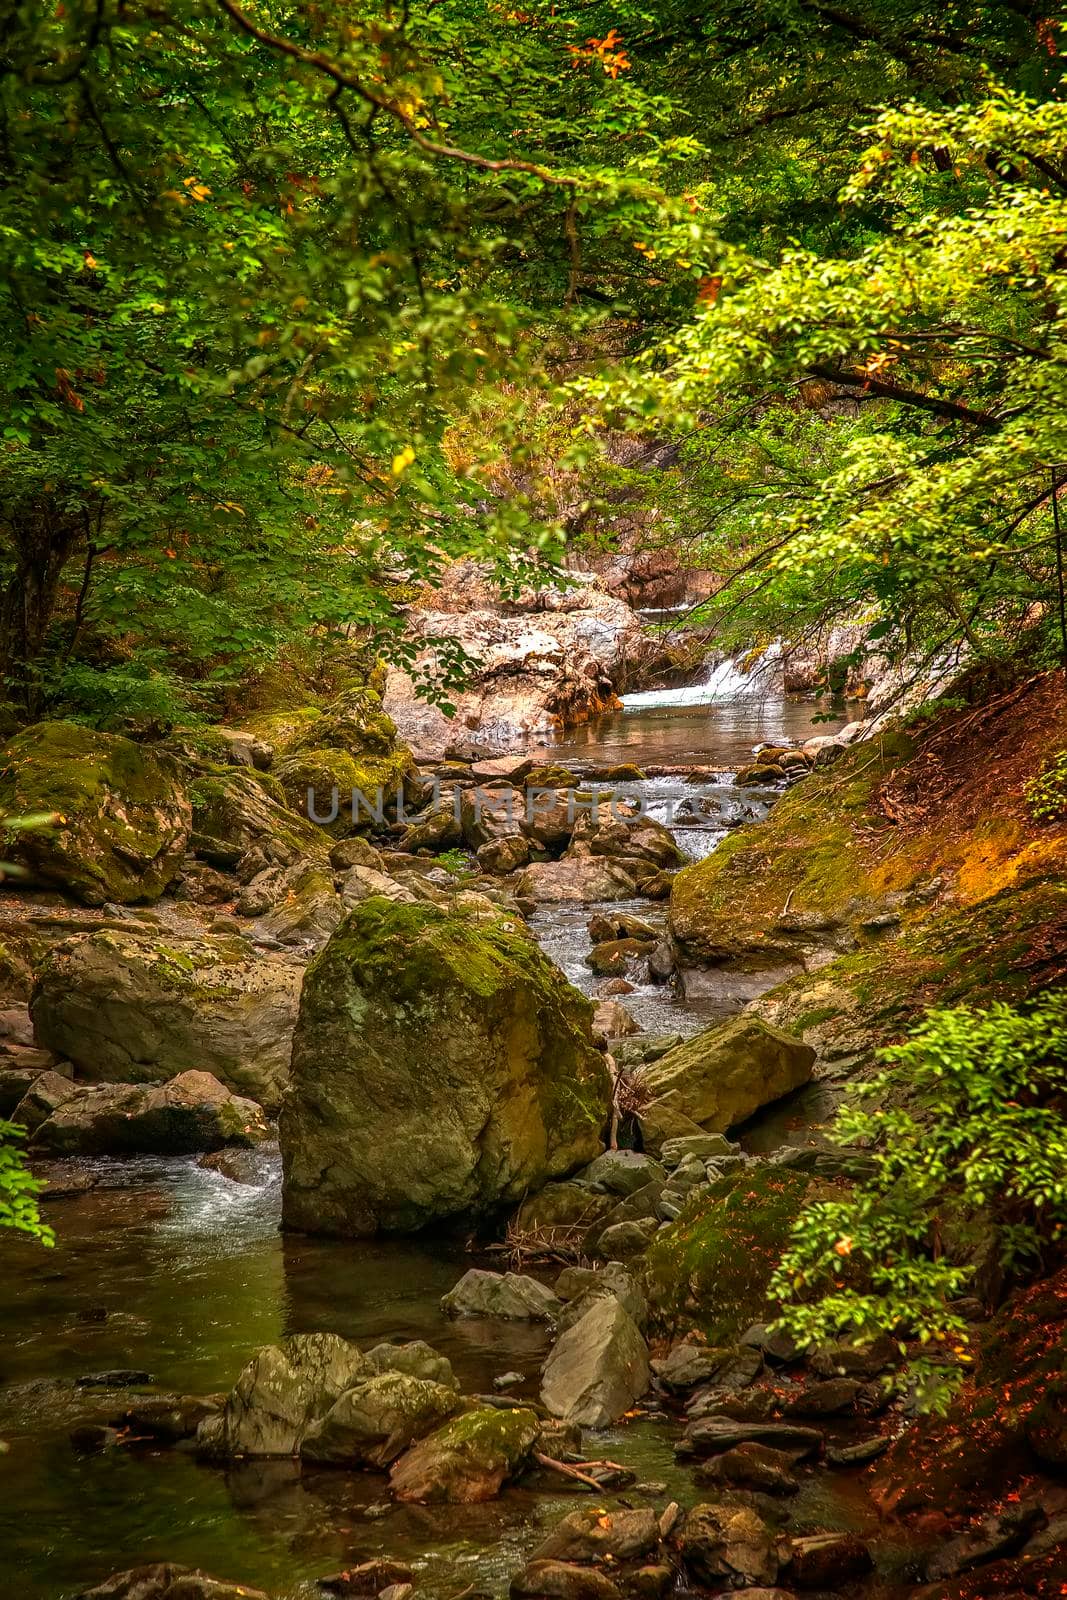 Rocky creek in the forest. River with rocks. densely overgrown forest with flowing stream nature background.